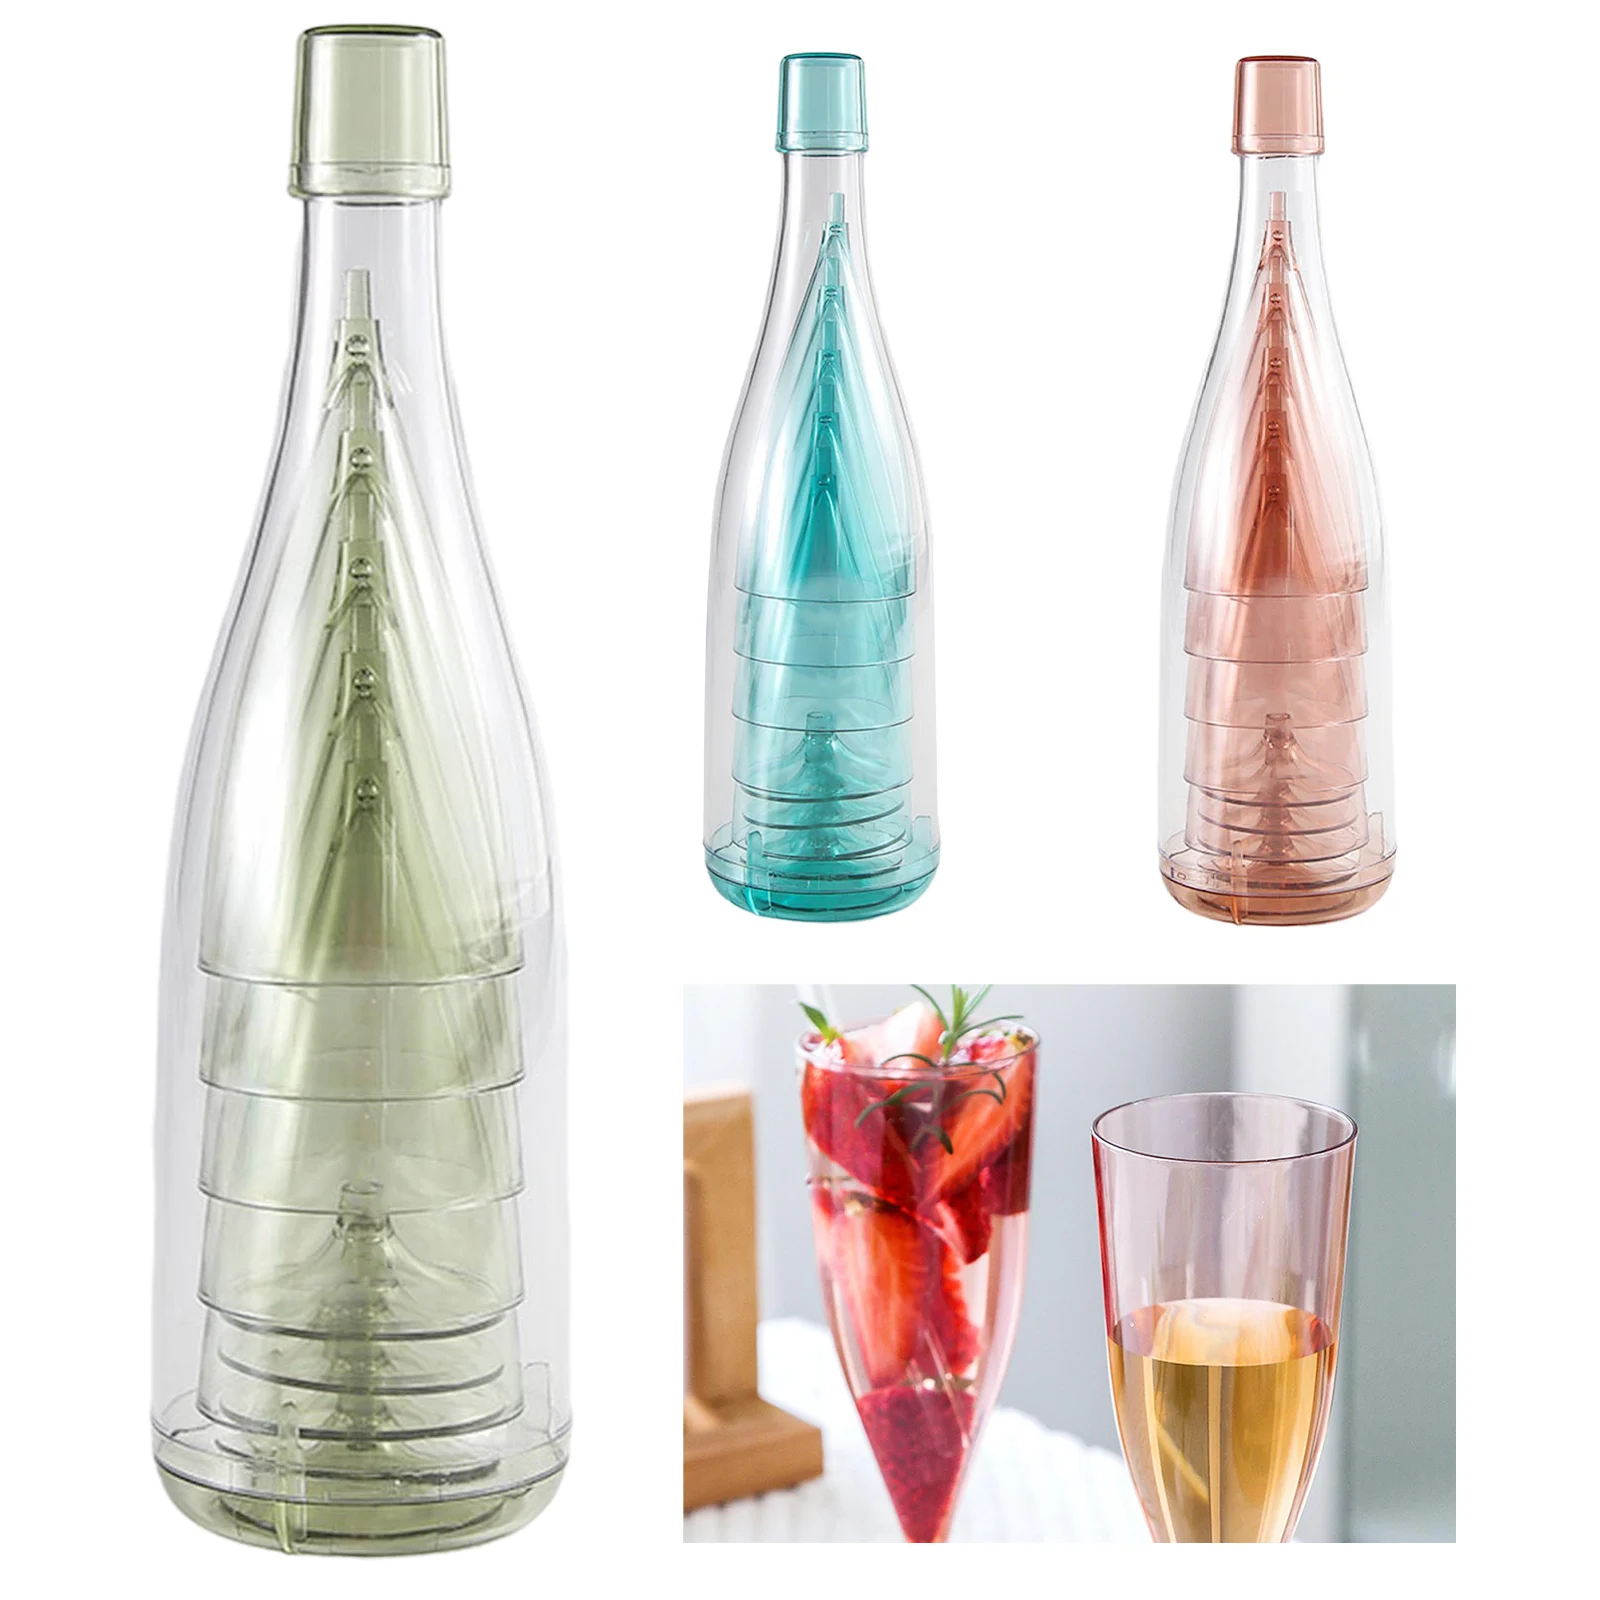 

5Pcs/Set Champagne Glasses Reusable Plastic Cup With Storage Bottle Portable Drink Juice Glass Cocktail Party Barware Tools